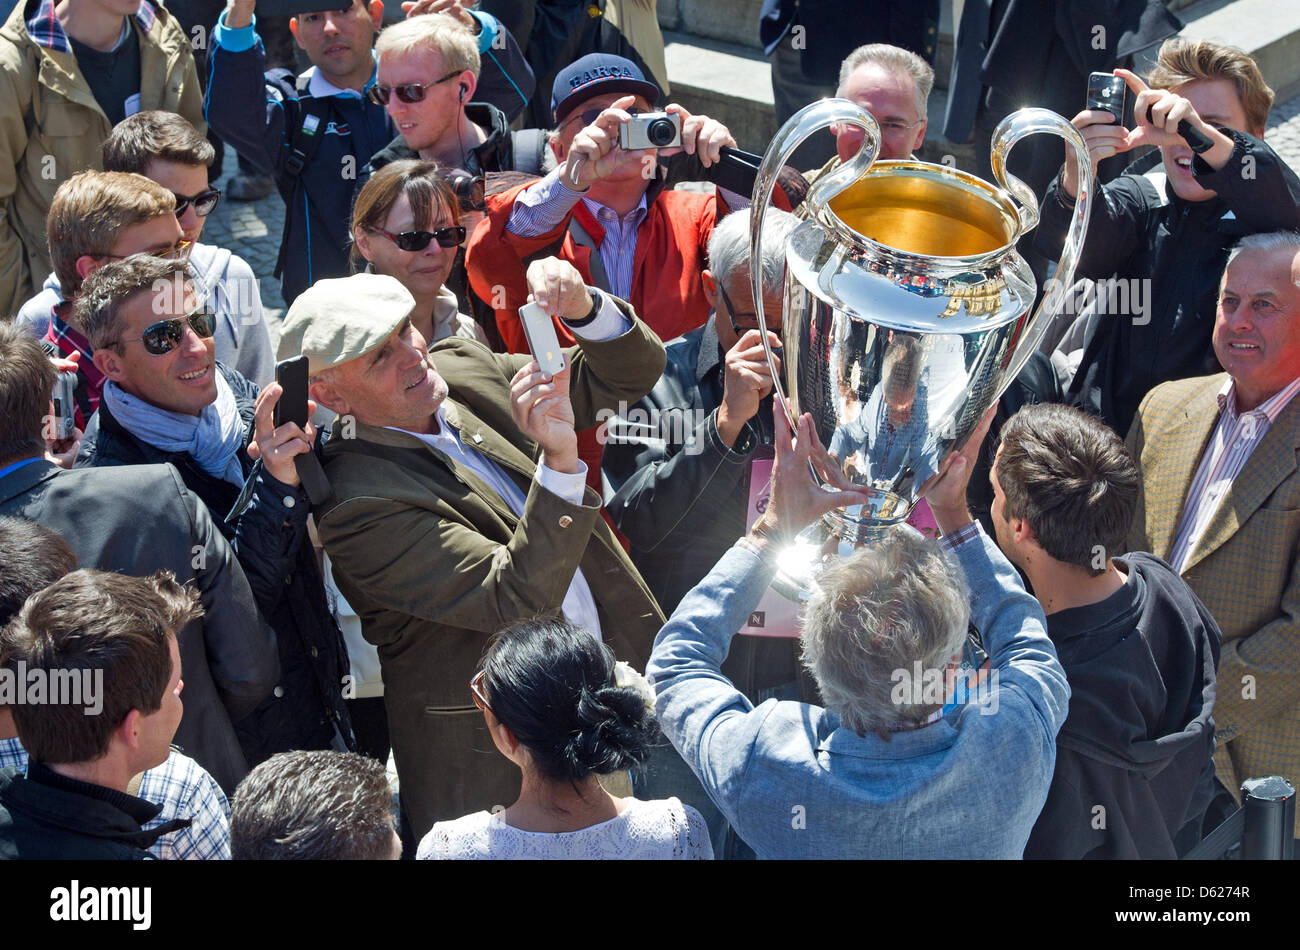 Former Bayern Munich soccer player Paul Breitner holds the UEFA  Champions League Cup during a Champions League Cup bus tour in Munich, Germany, 14 May 2012. The Champions League final match between FC Bayern Munich and Chelsea FC will take place on 19 May 2012. Photo: PETER KNEFFEL Stock Photo